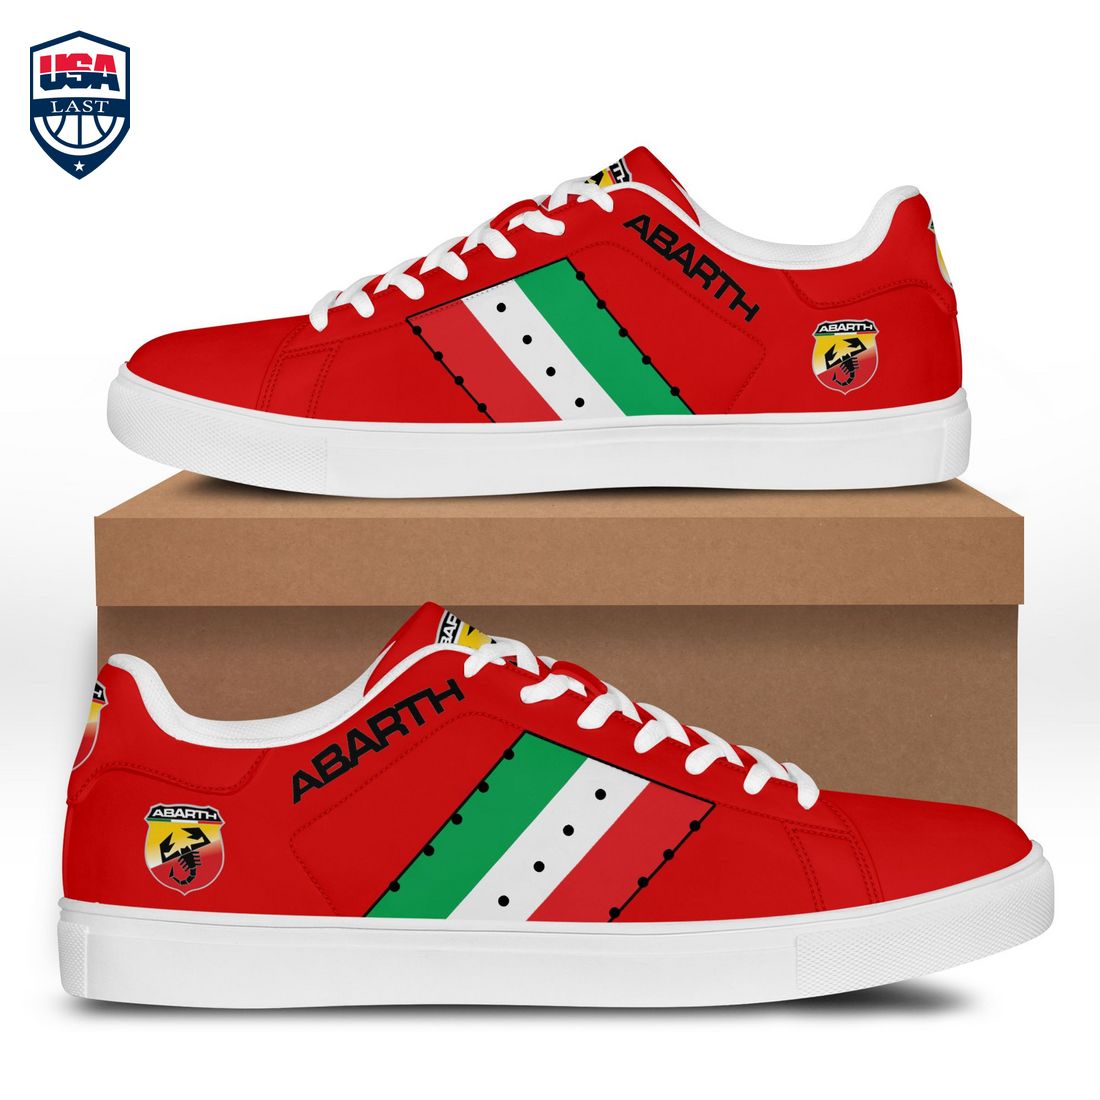 abarth-green-white-red-stripes-style-7-stan-smith-low-top-shoes-1-GUqXt.jpg